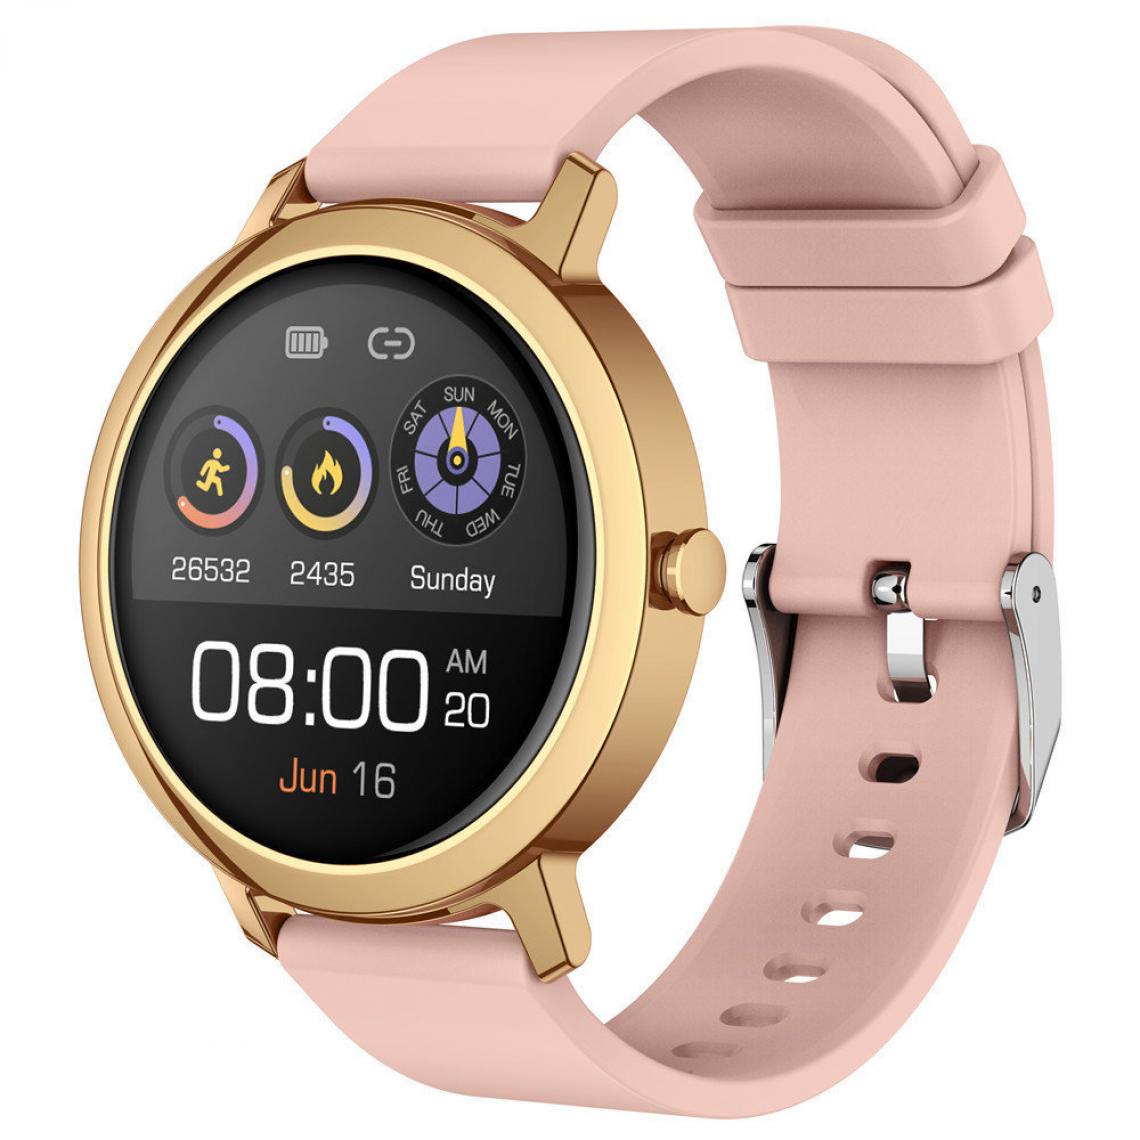 Chronotech Montres - Chronus S17 Smart Watch, MP3 Music Player, Bluetooth Call, Heart Rate Monitor, Sports Smart Watch, Male Woman Suitable for Android Ios Cell Phones - Montre connectée